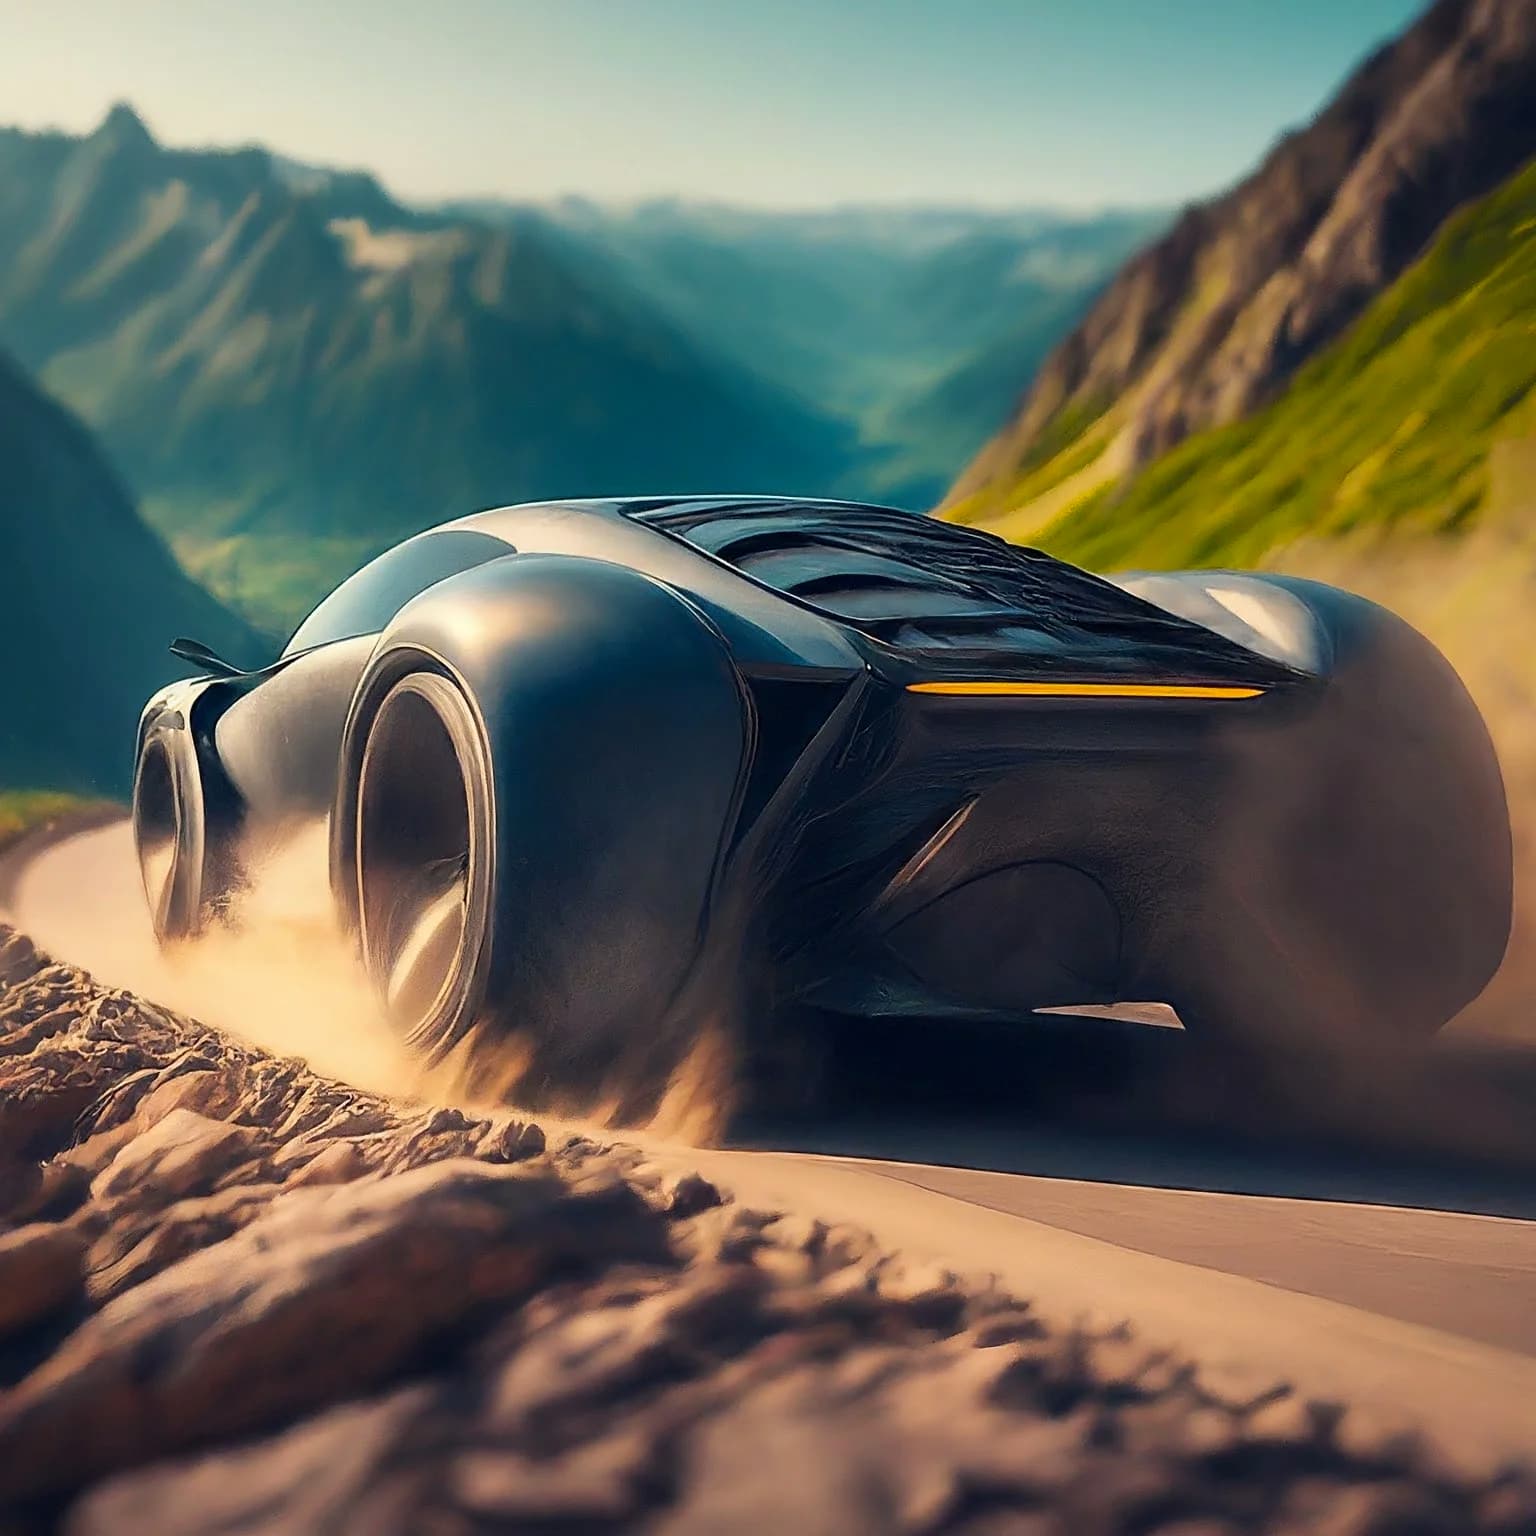 Prompt: “Generate an image of a futuristic car driving through an old mountain road surrounded by nature.”